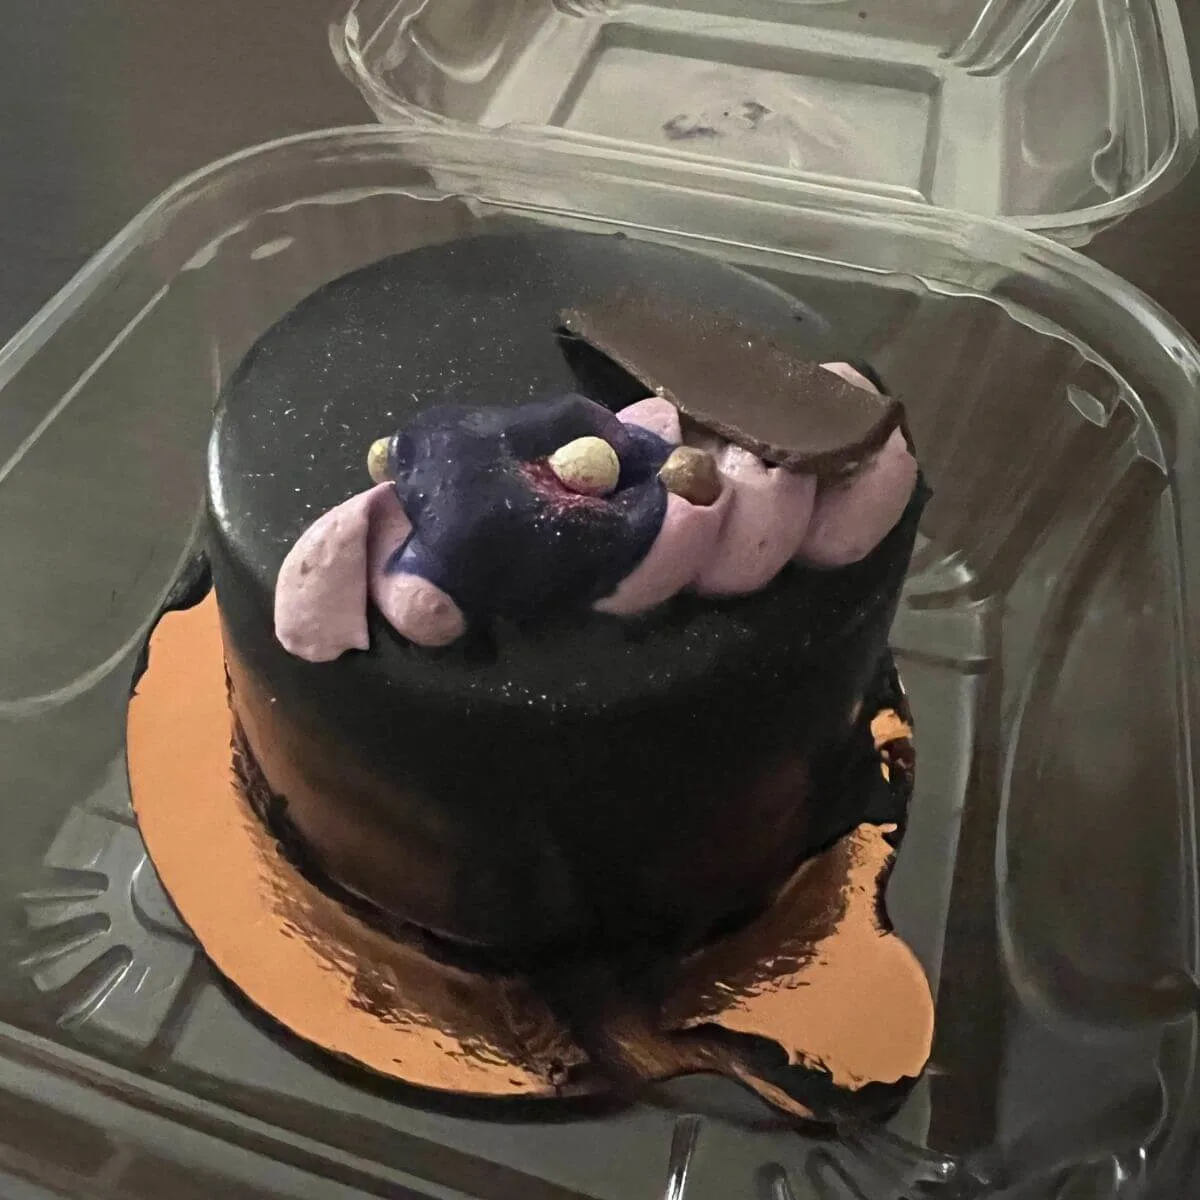 Closeup photo of a chocolate-ginger petite cake with purple iridescent garnish on top.